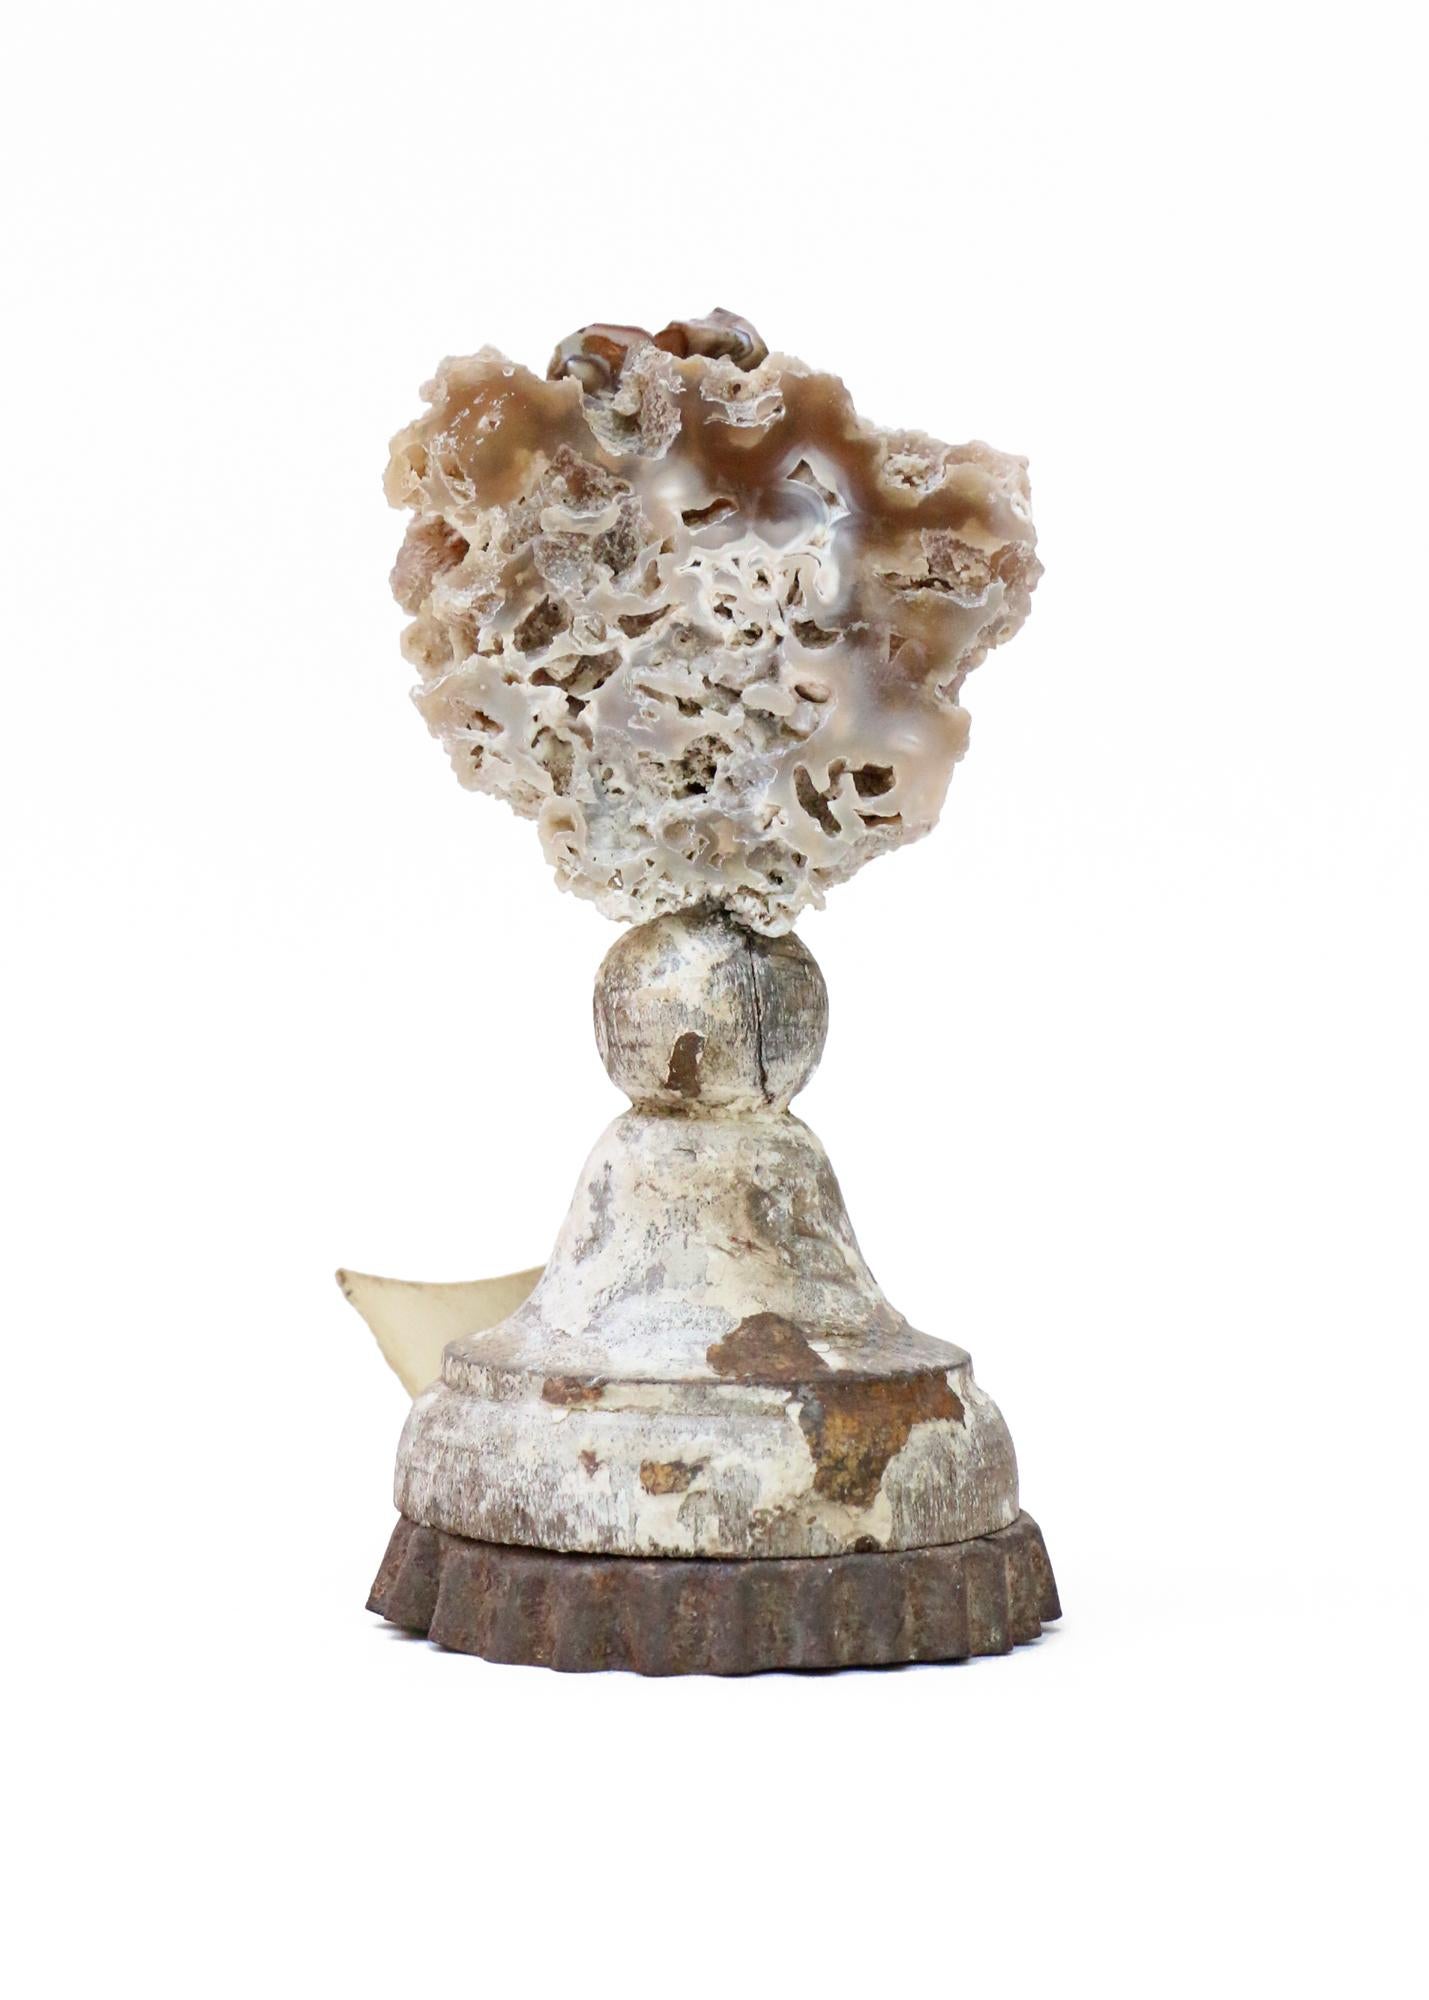 Sculptural 18th century Italian silver leaf candlestick top with fossil agate coral.

The hand-carved, silver leaf candlestick top originally came from a candlestick from a church in Tuscany. It stands on the candlestick's original metal drip pan